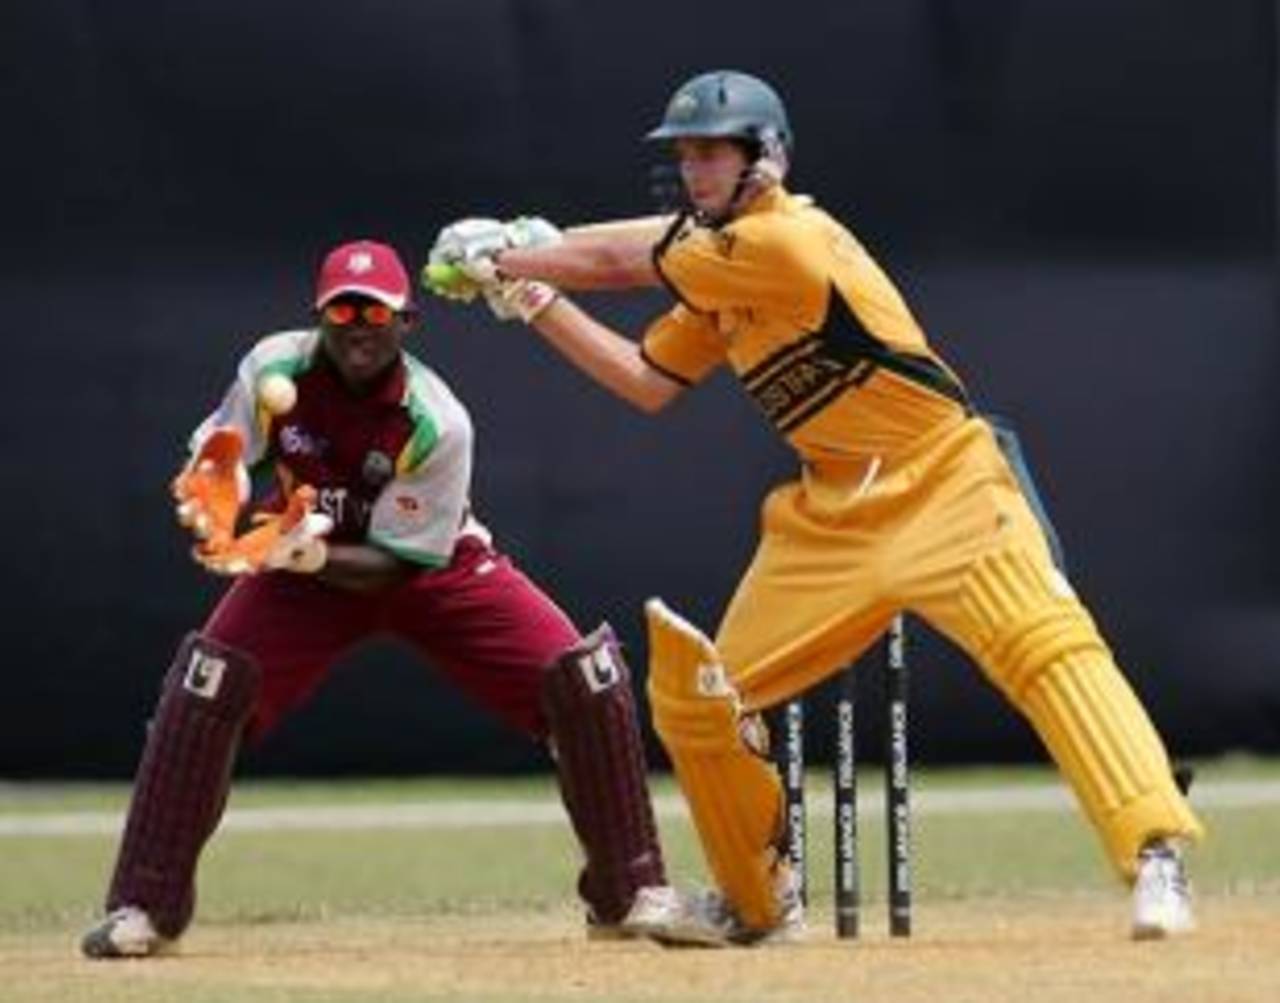 Michael Cranmer, who played for Australia at the 2008 Under-19 World Cup, is expected to make his state debut for South Australia&nbsp;&nbsp;&bull;&nbsp;&nbsp;International Cricket Council